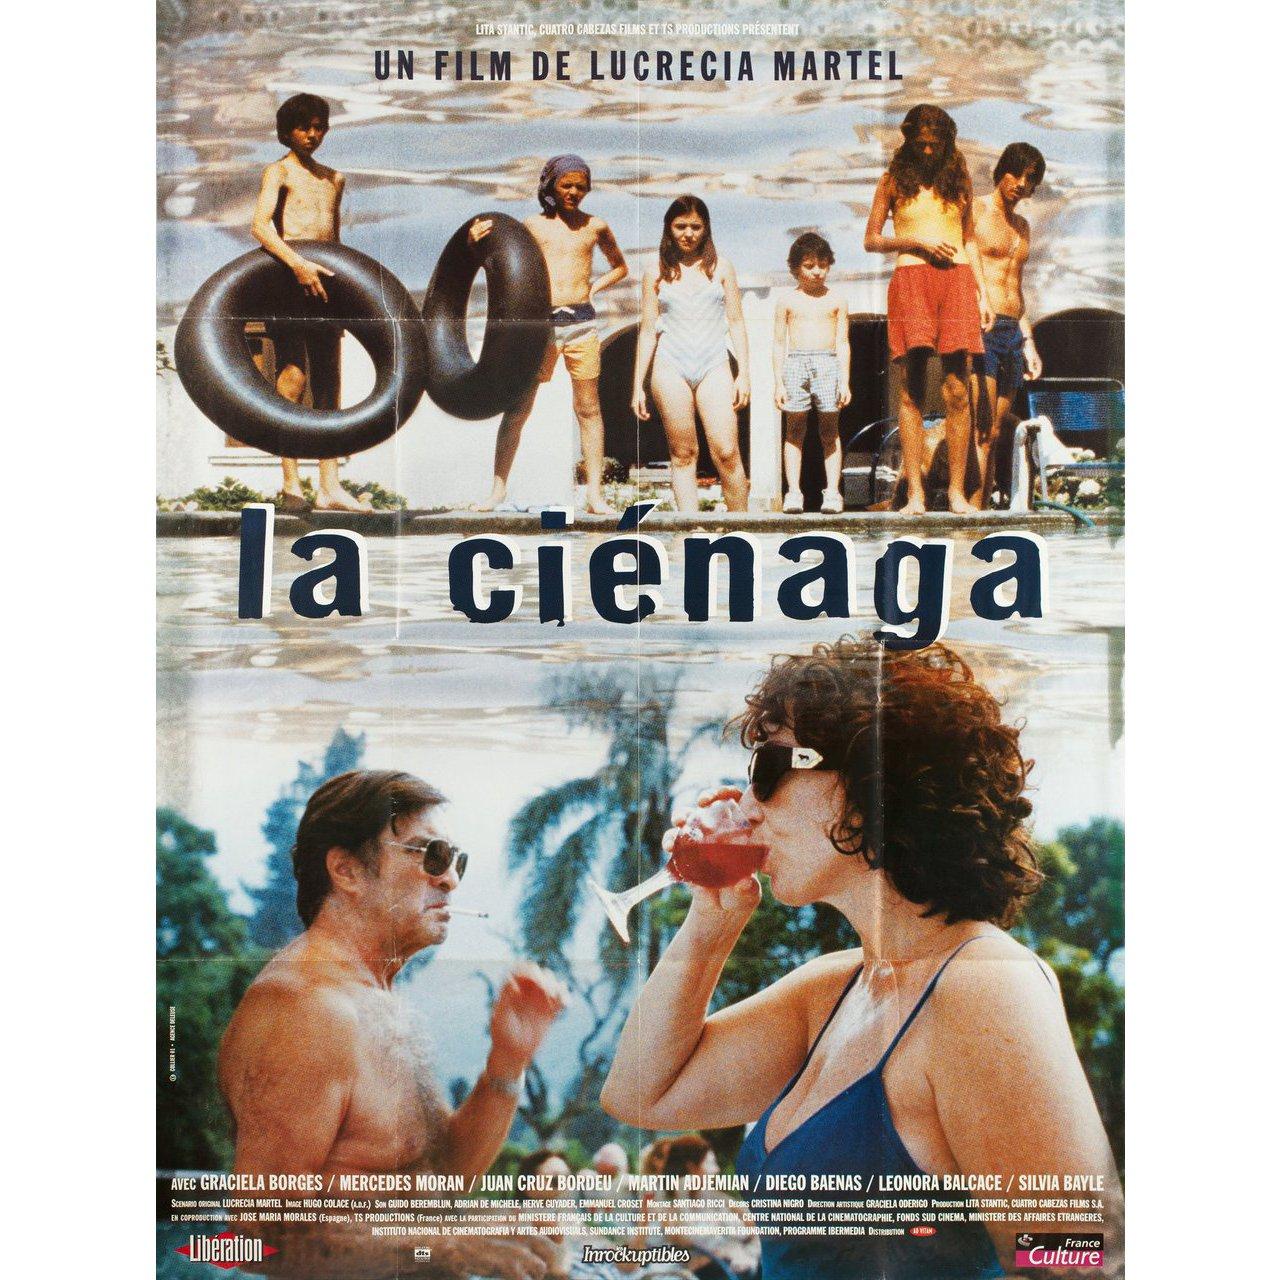 Original 2001 French grande poster for the film La Cienaga directed by Lucrecia Martel with Mercedes Moran / Graciela Borges / Martin Adjemian / Leonora Balcarce. Very Good-Fine condition, folded. Many original posters were issued folded or were